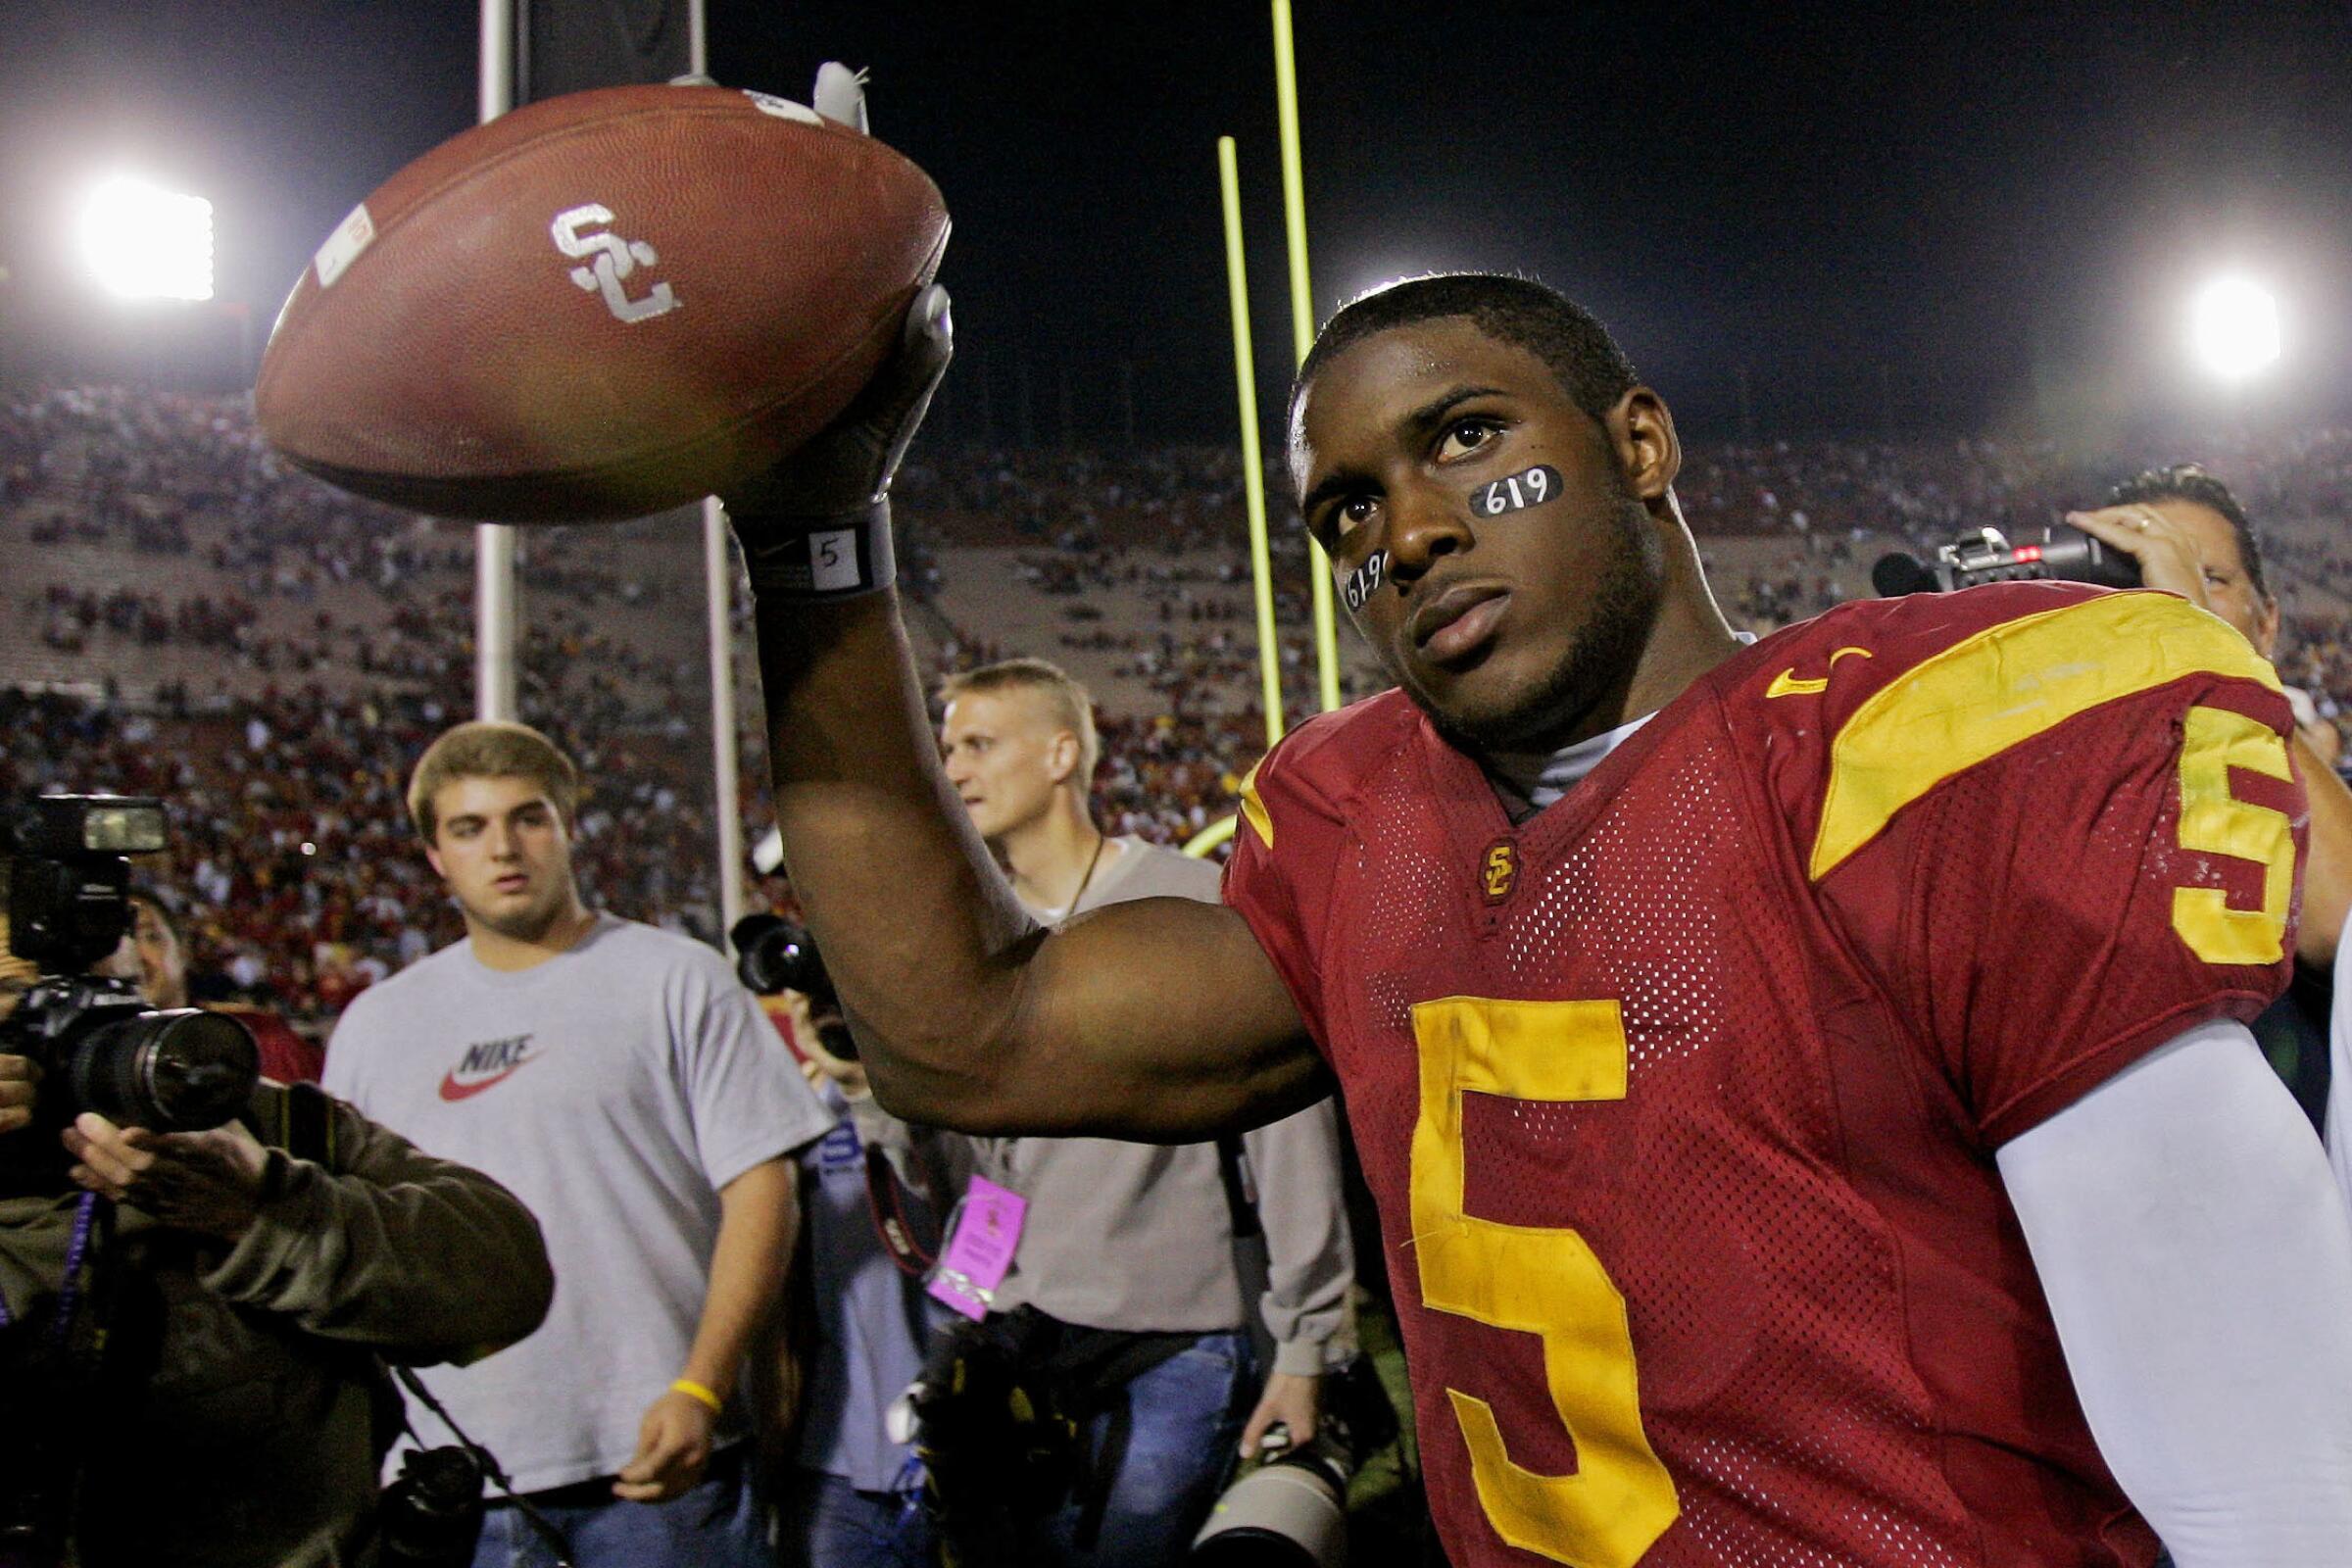 Reggie Bush holds up a football on the field next to a TV camera